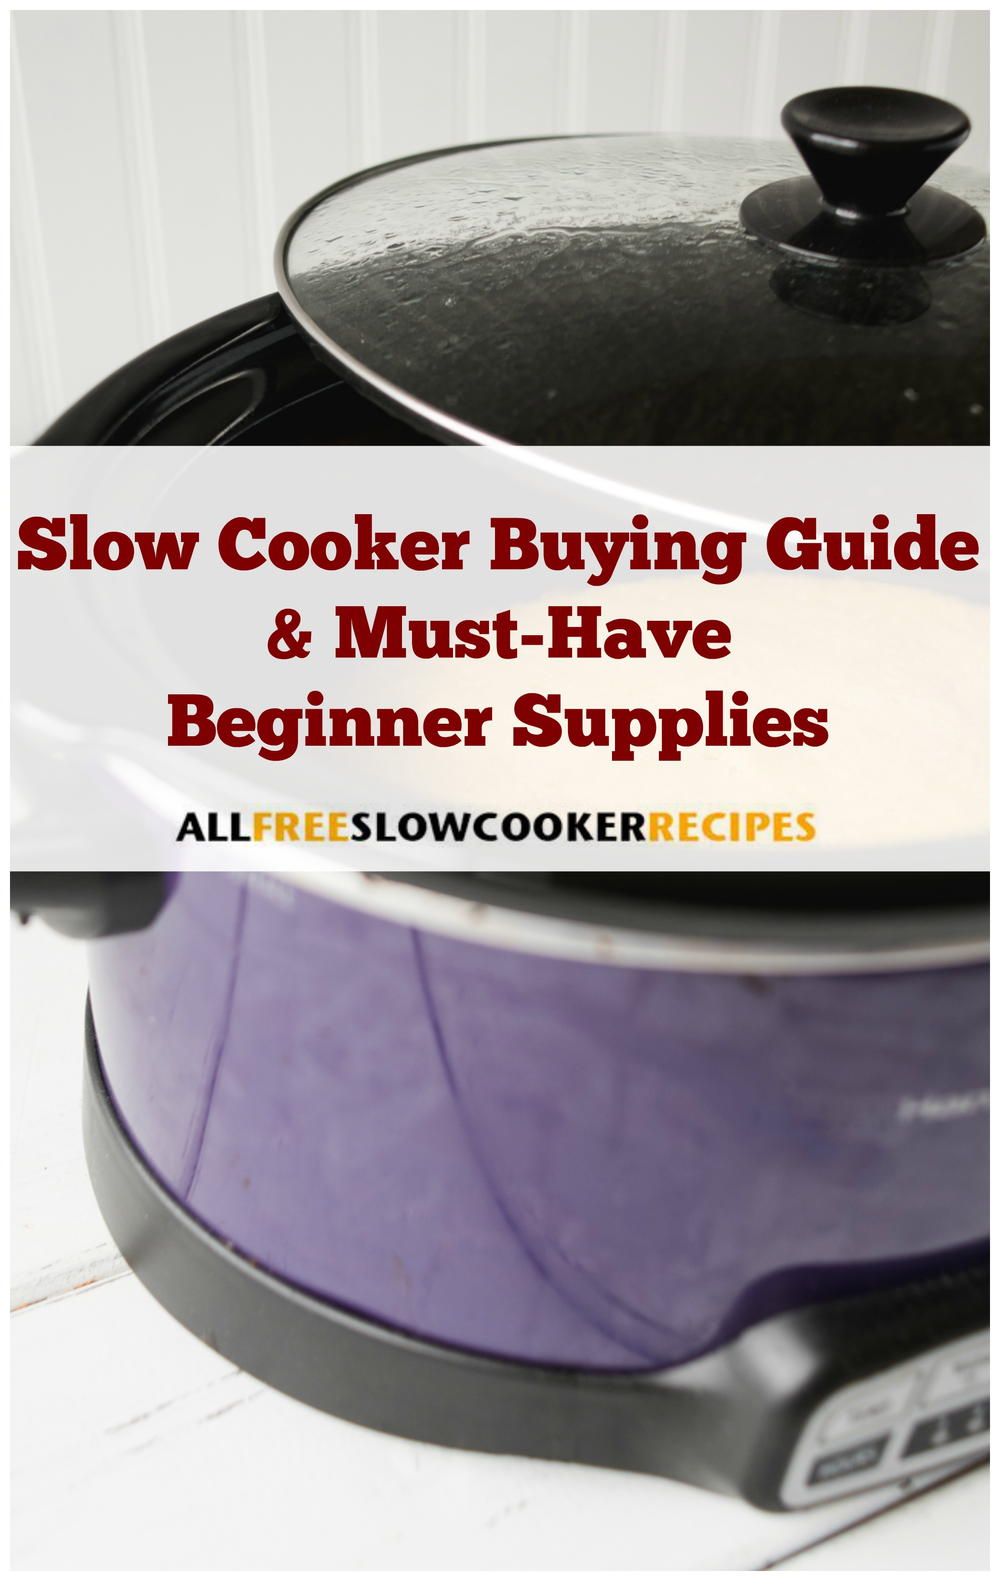 https://irepo.primecp.com/2017/11/355228/Slow-Cooker-Buying-Guide-image_ExtraLarge1000_ID-2527132.jpg?v=2527132